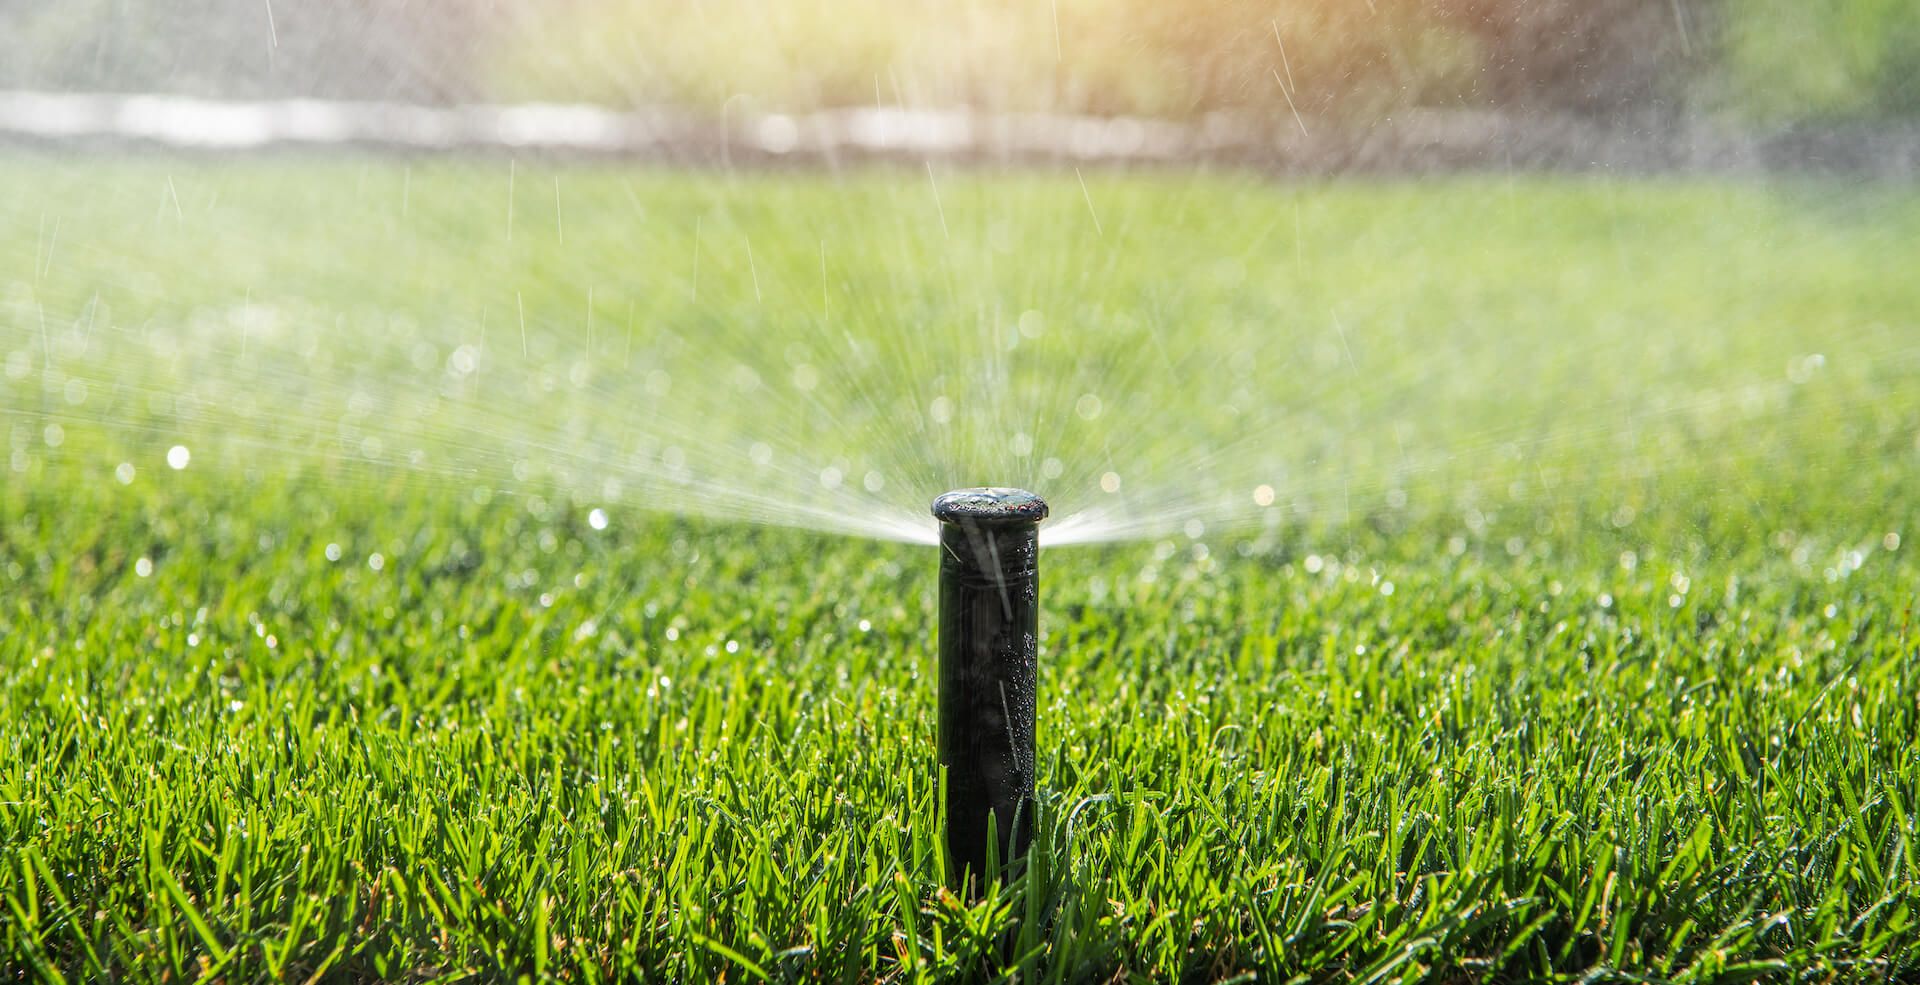 How Often Should You Water Bermuda Grass Seed